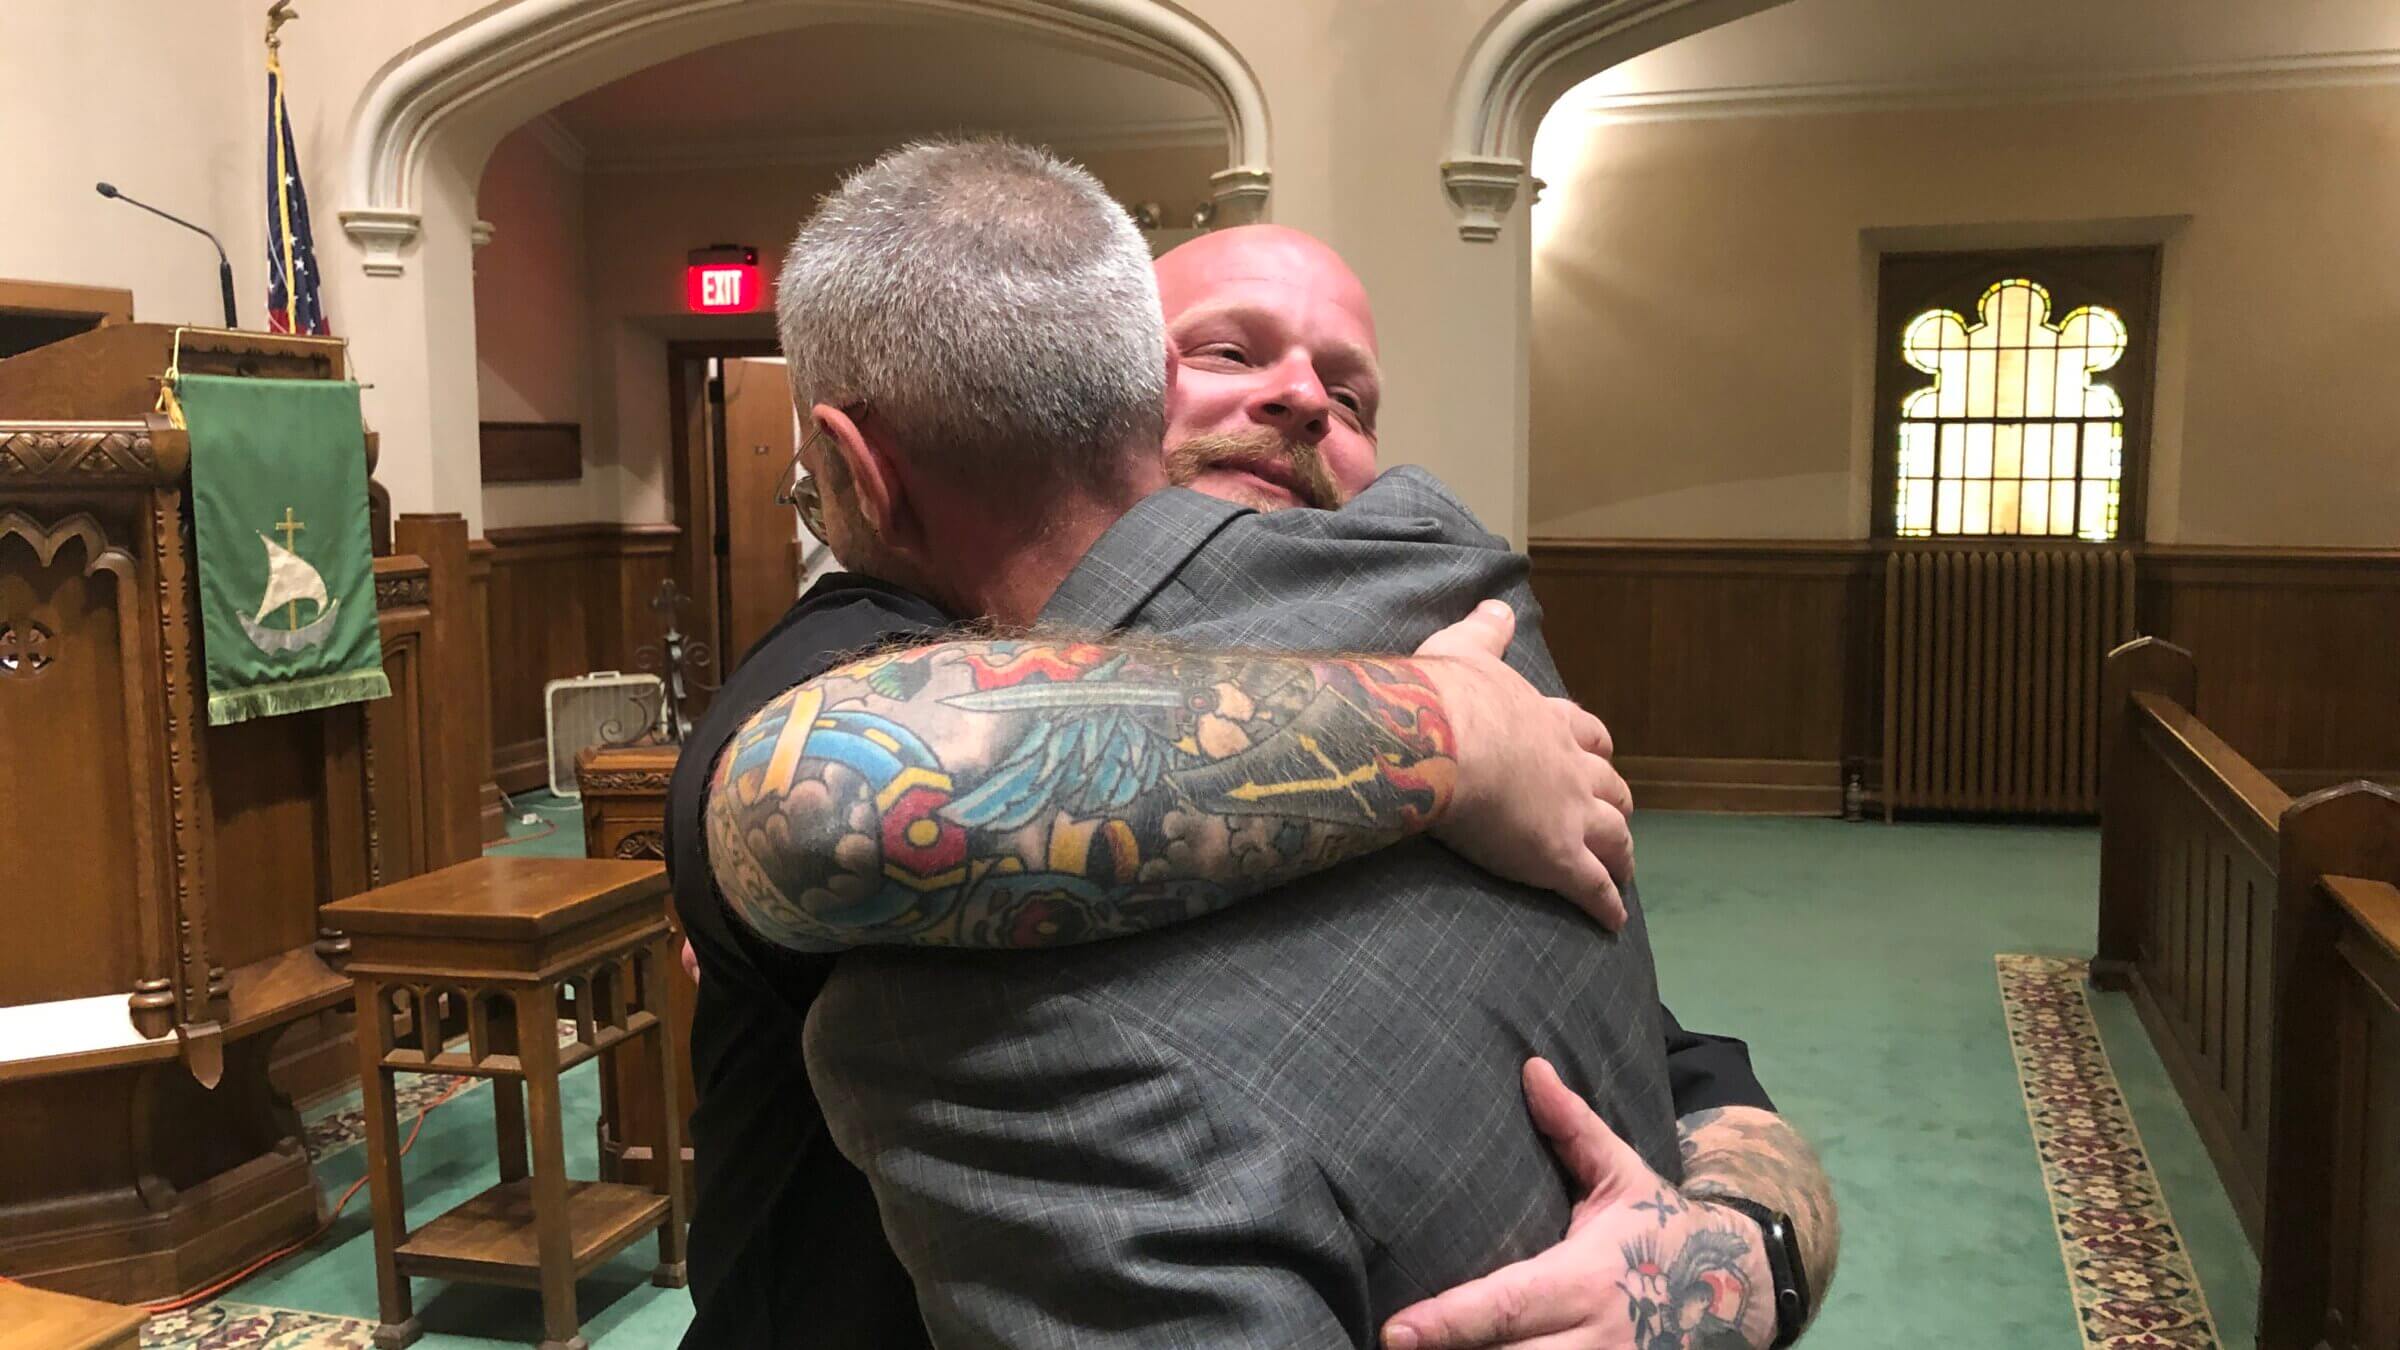 The Rev. Quincy Worthington, of the Highland Park Presbyterian Church, hugs event co-planner the Rev. Bryan Cones of Trinity Episcopal Church at the conclusion of the interreligious community vigil Tuesday night.